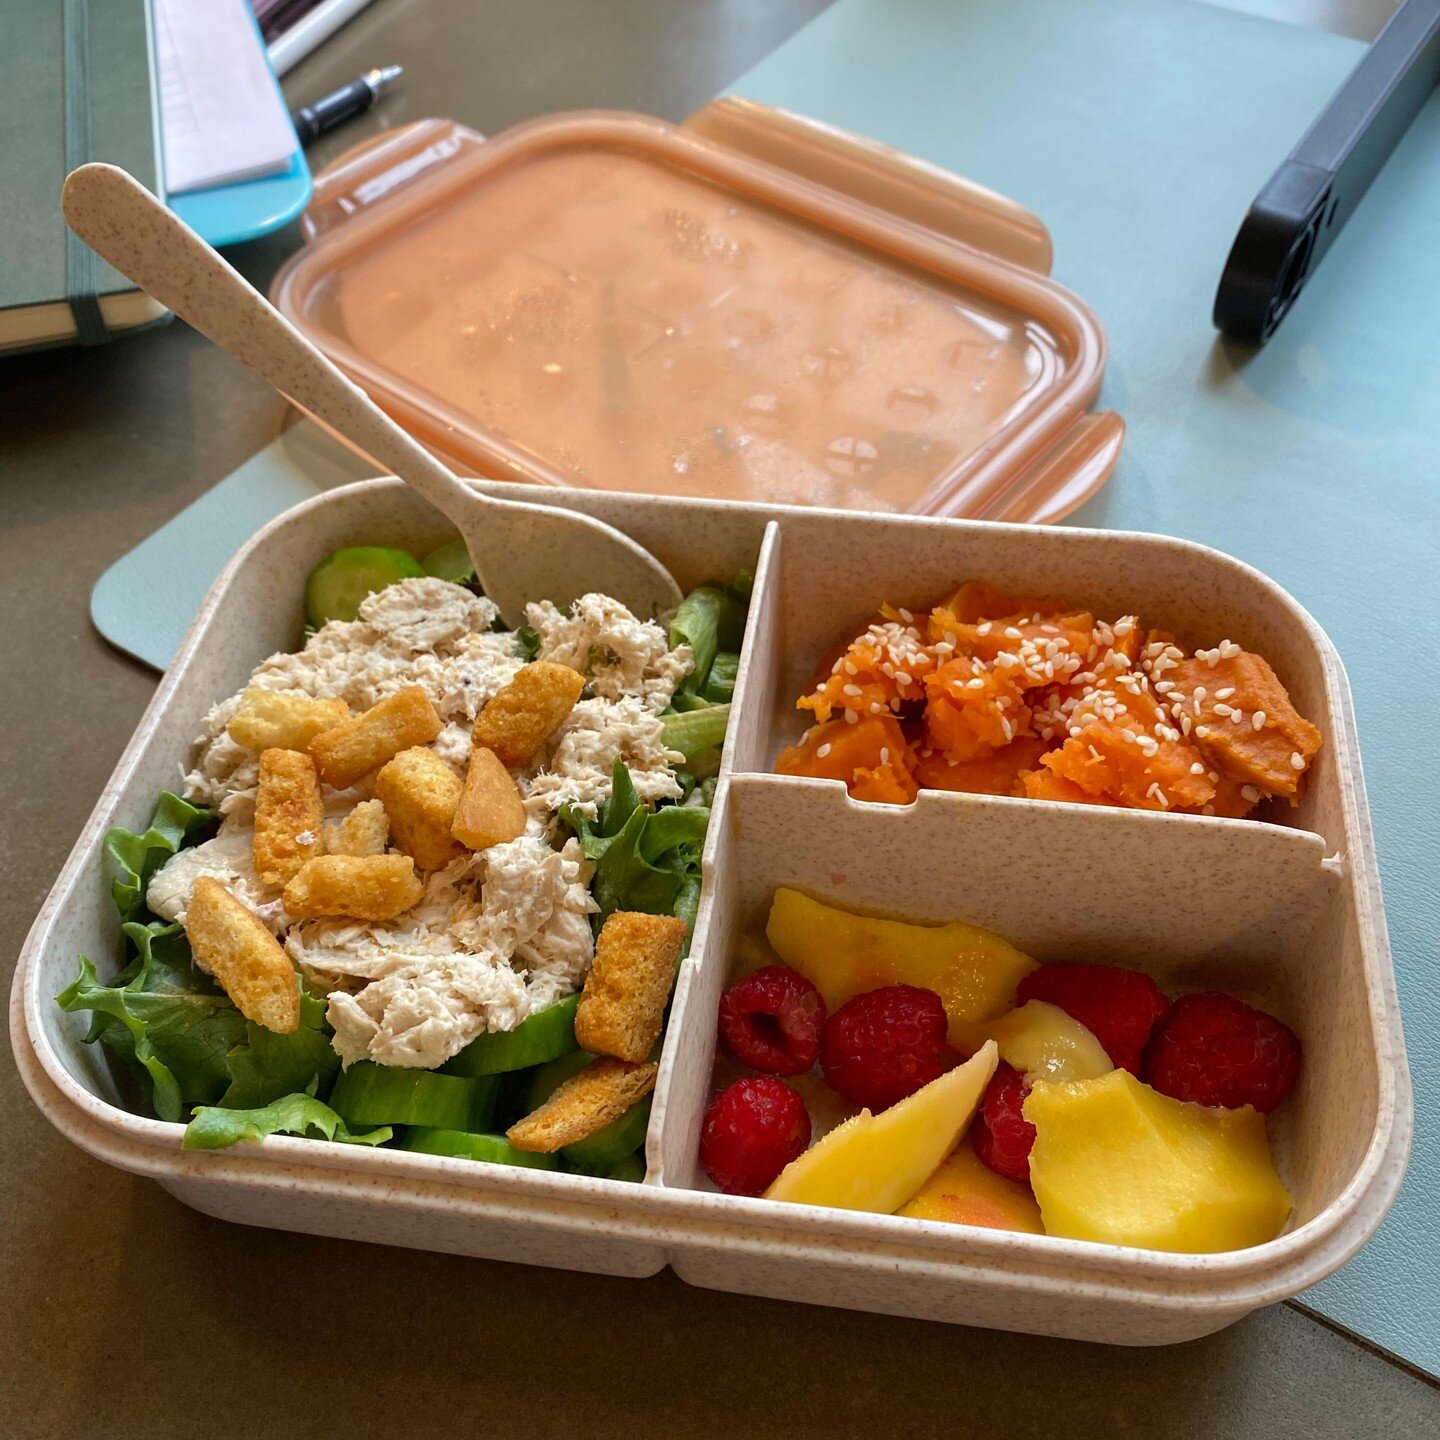 Quick put together lunch doesn't have to mean poor quality. 

🥗 Salad with cucumber &amp; croutons
🐟 Tuna packet
🍠 Leftover sweet potato from dinner
🥭 Mango &amp; raspberries

Even though this was a quick put together lunch the focus was still on